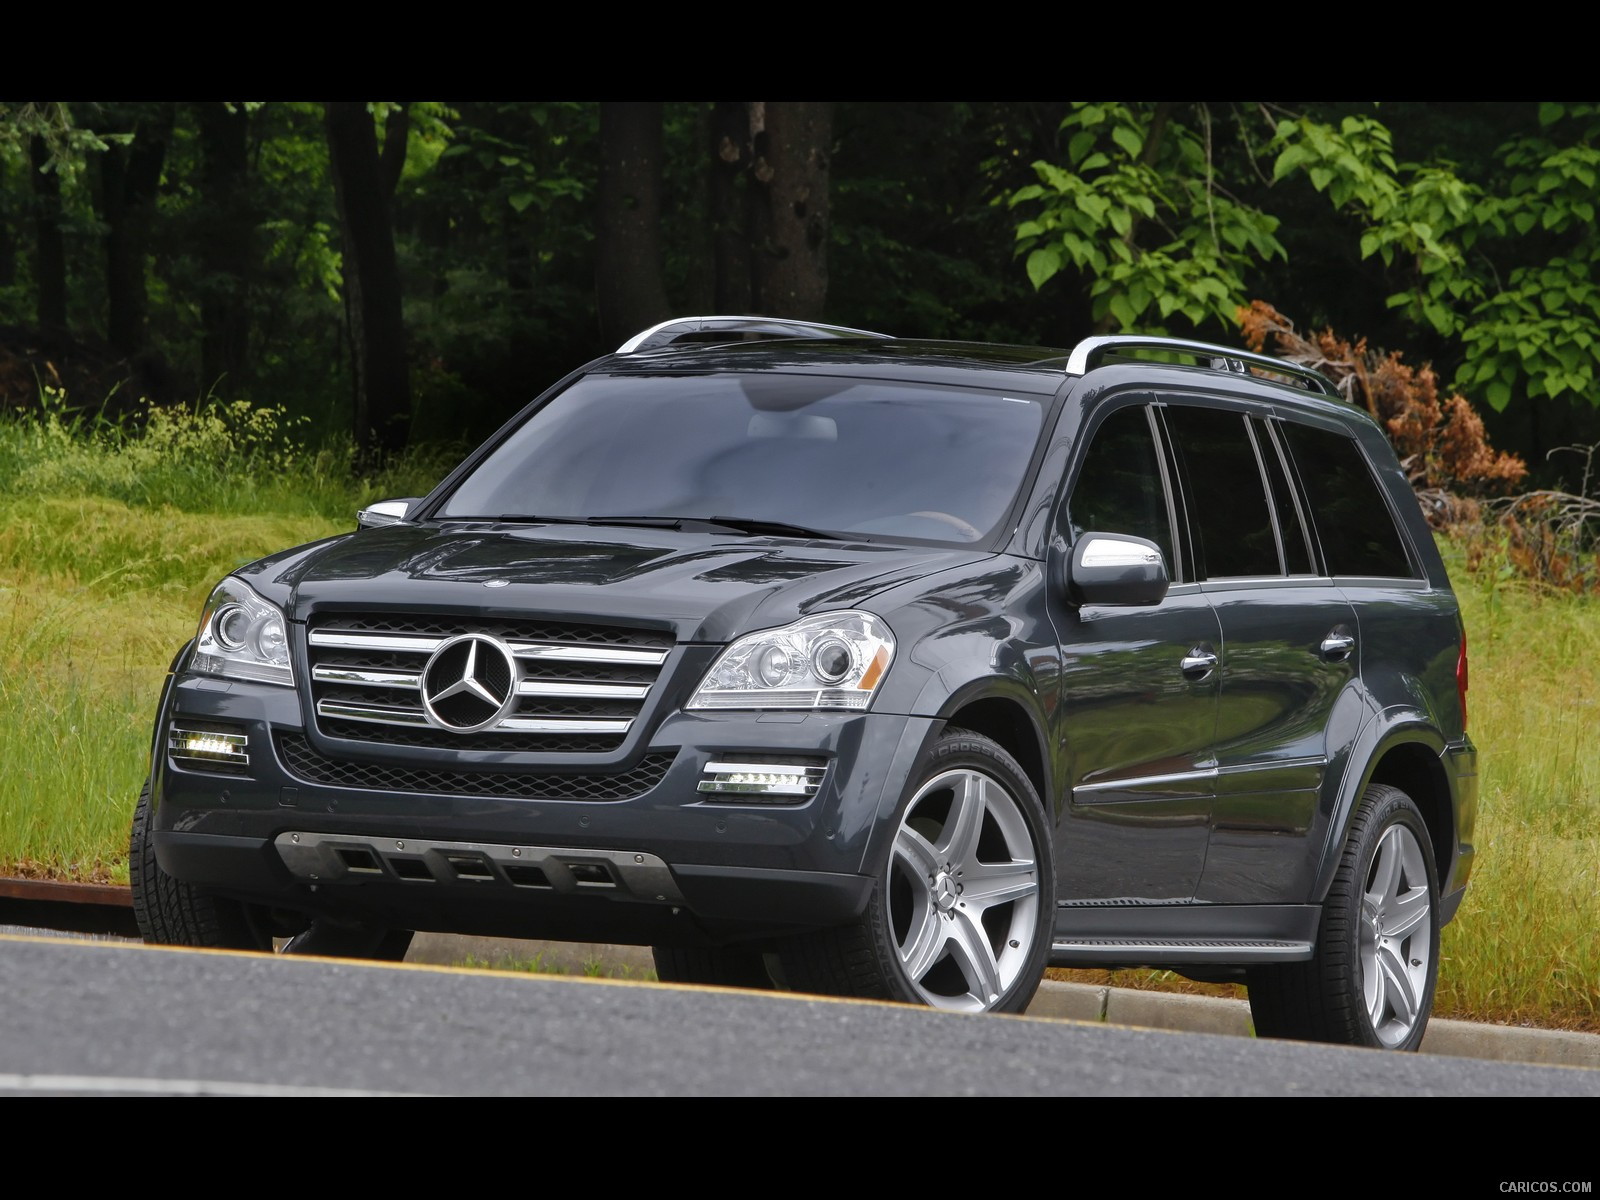 2010 Mercedes-Benz GL550 - Front, #49 of 112